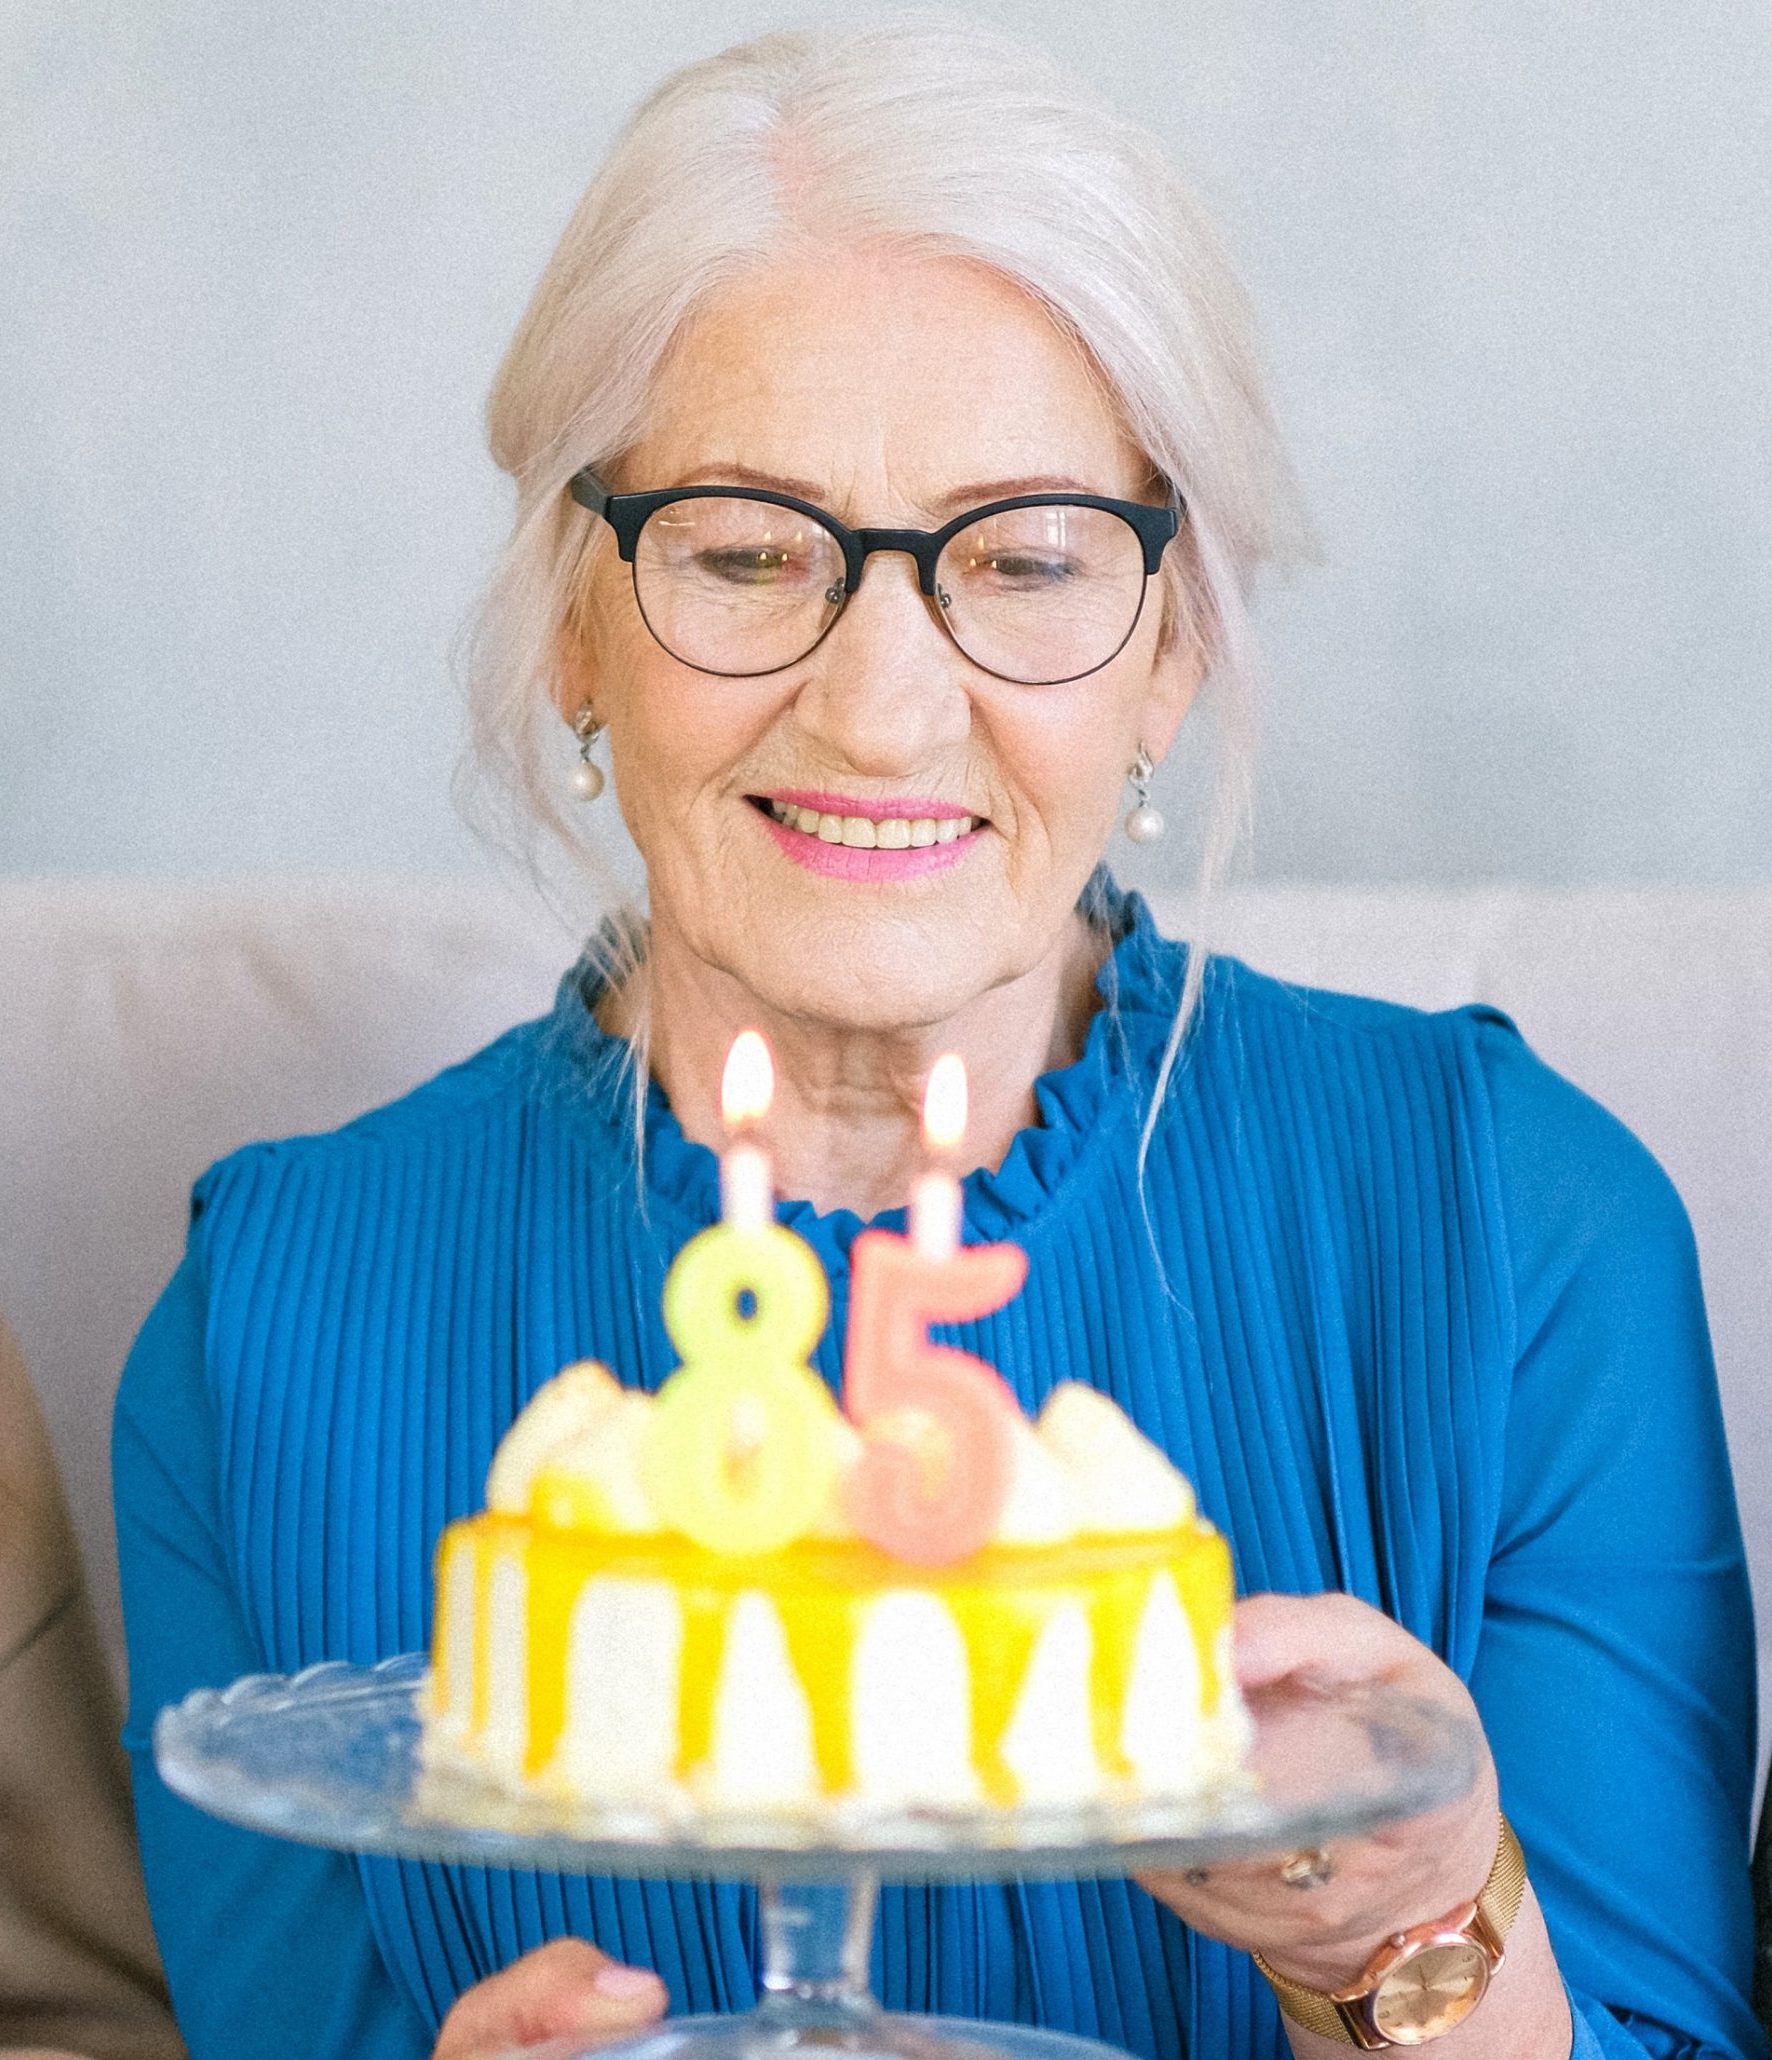 6 trends you’ll never be “too old” for